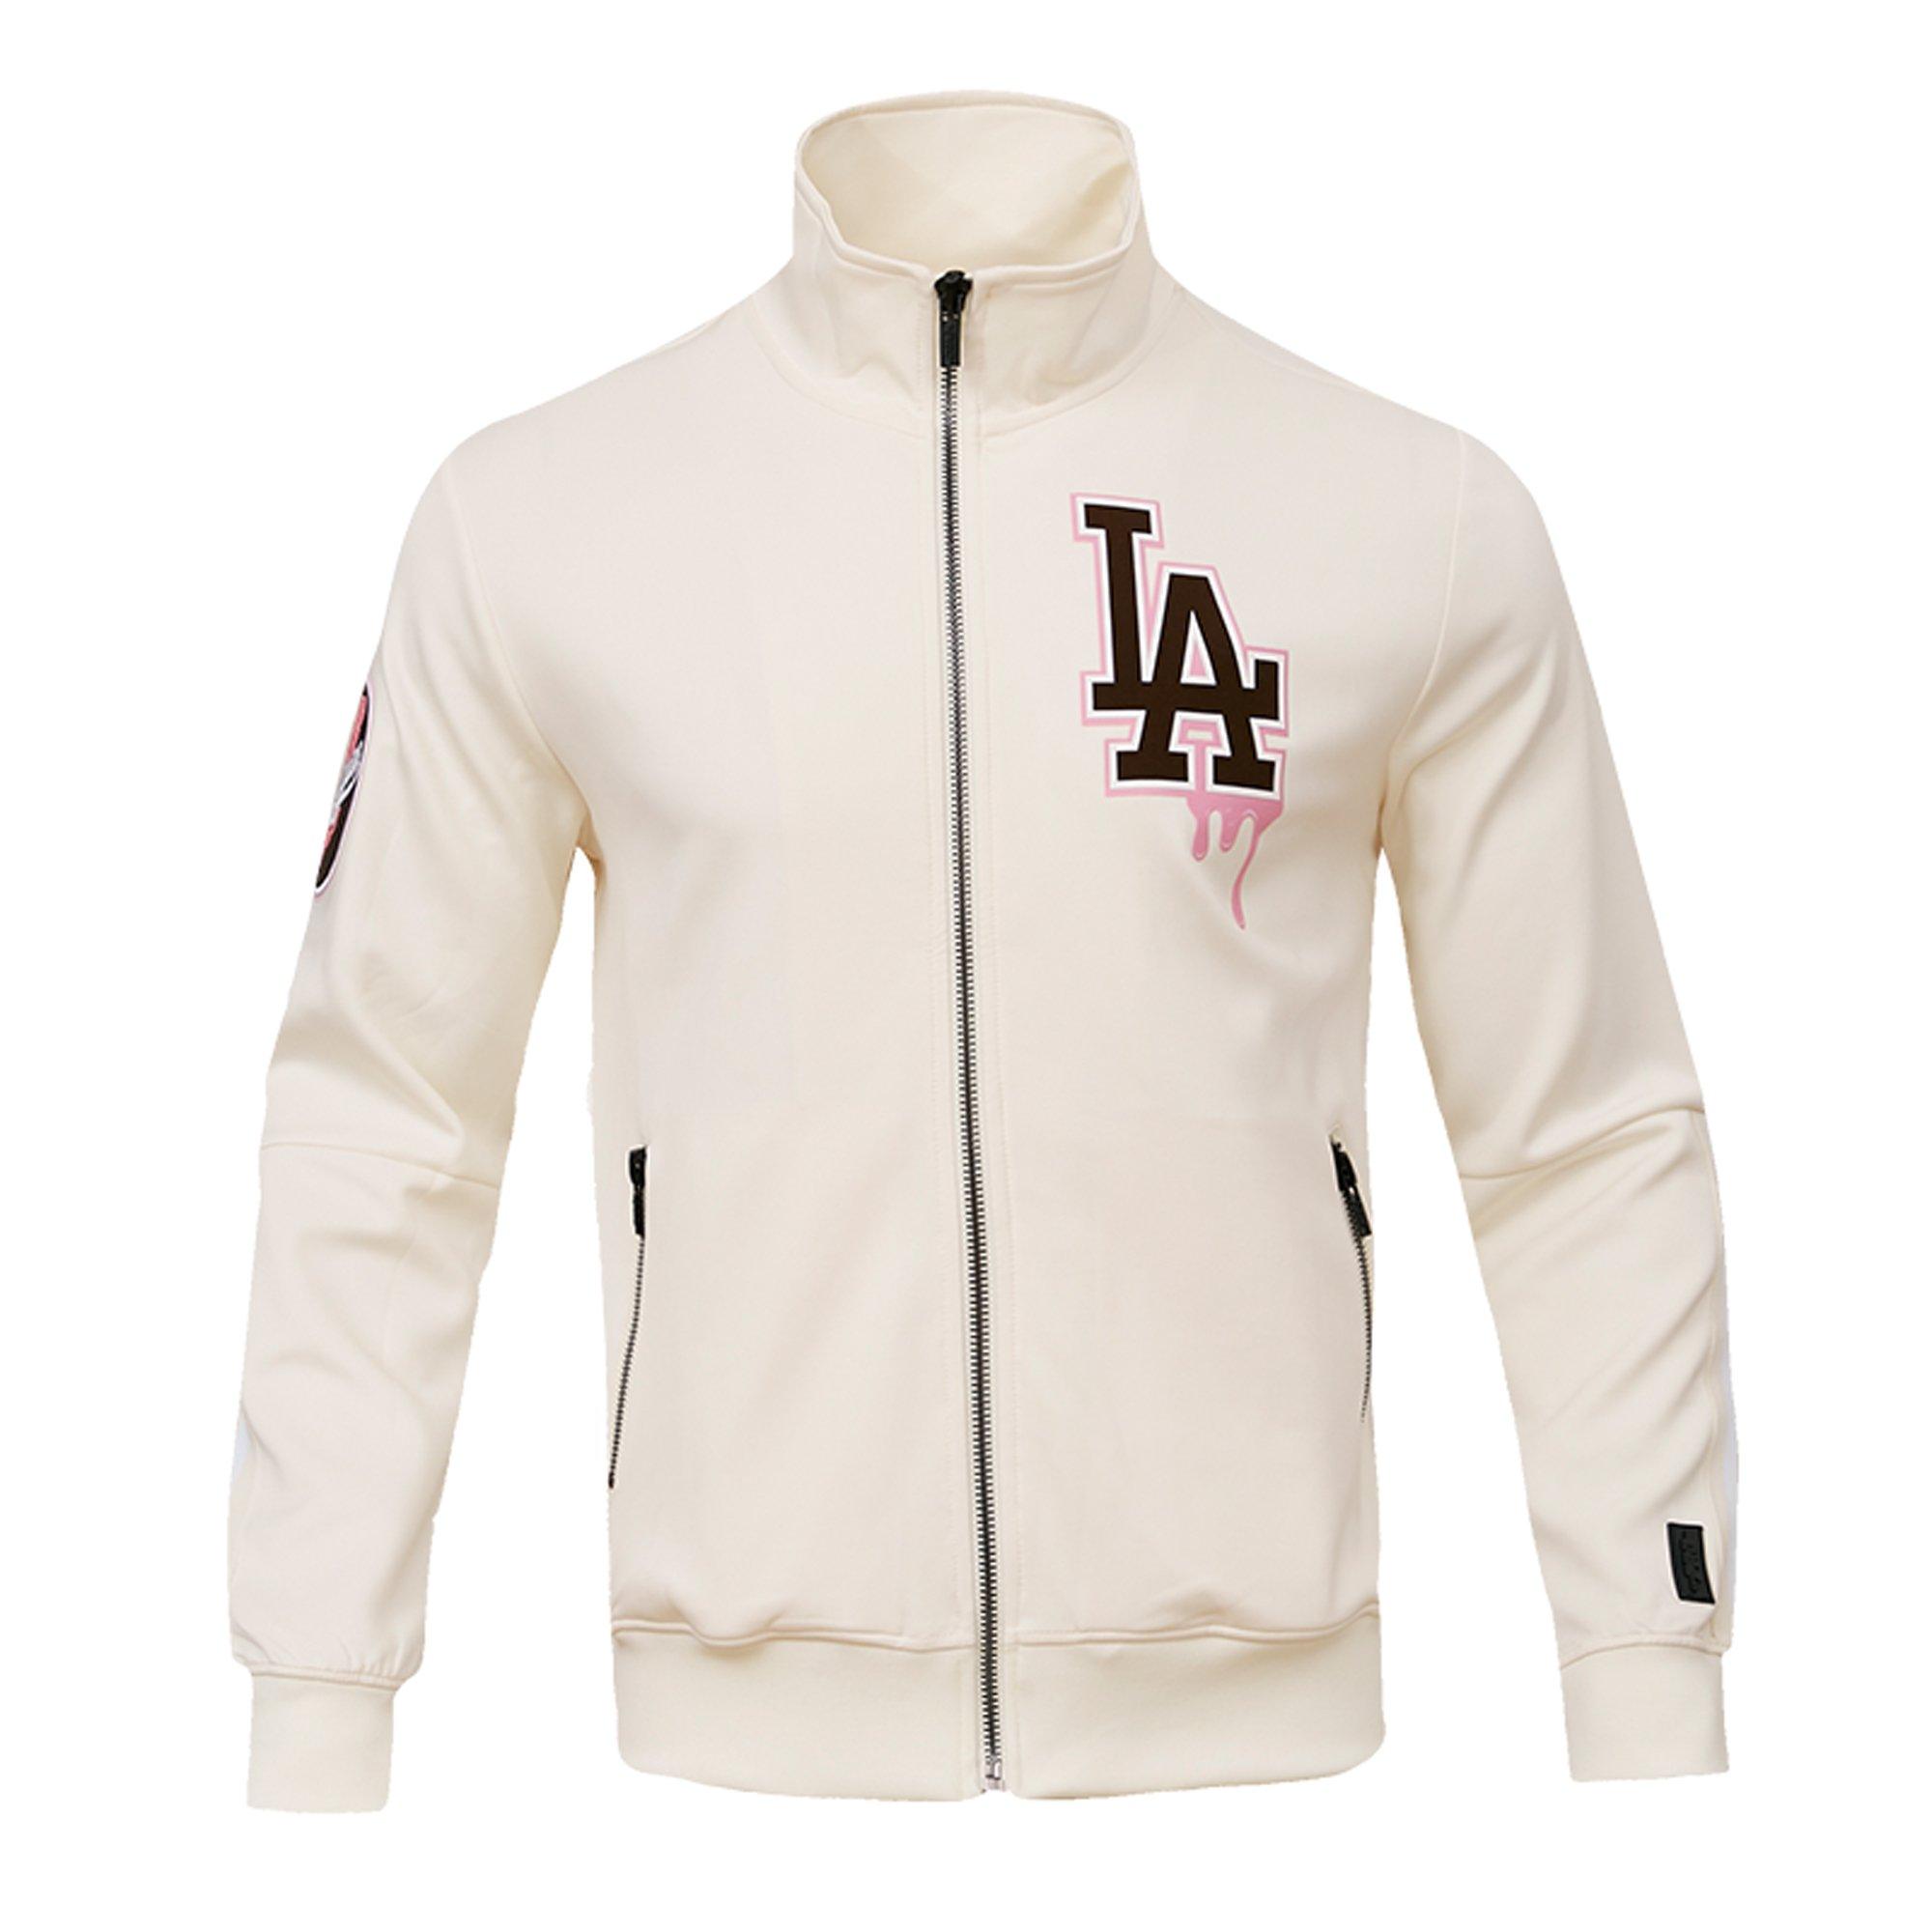 Official Los Angeles Dodgers Jackets, Dodgers Pullovers, Track Jackets,  Coats